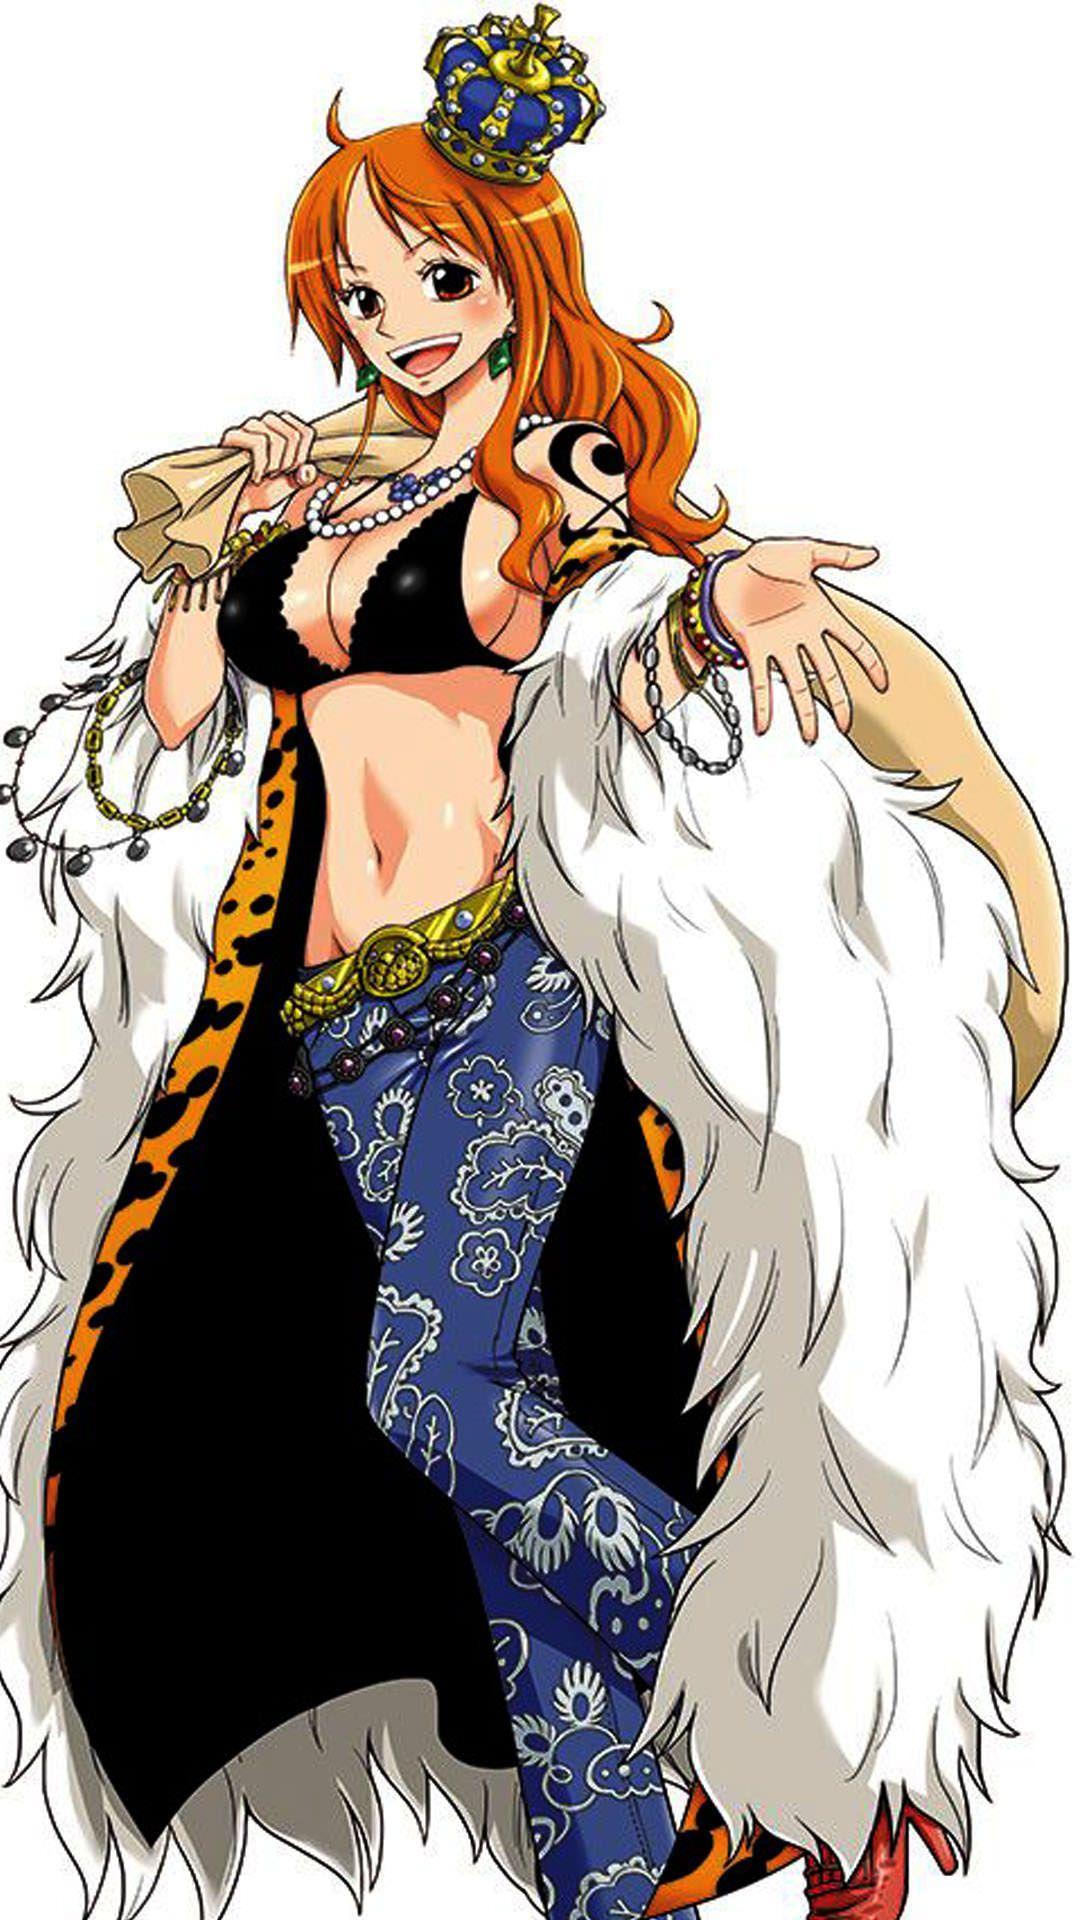 1080 x 1920 · jpeg - Nami One Piece HD Android Wallpapers - Wallpaper Cave